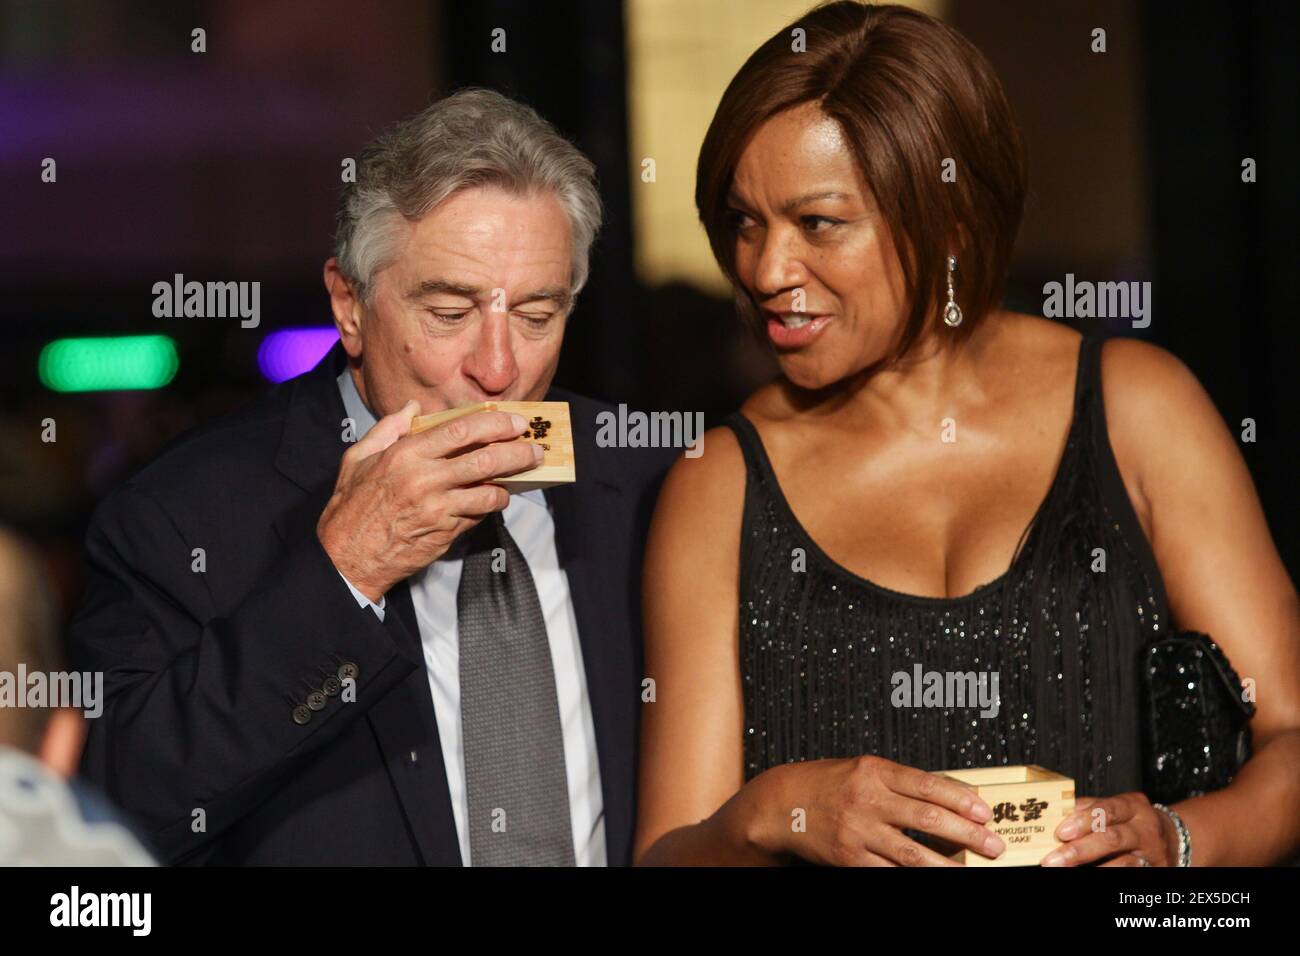 MAY 18, 2015 - Actor Robert De Niro (L) drinks sake with wife, Grace Hightower De Niro (R) during the opening of Nobu Hotel in Pasay City. Nobu hotel in Manila is the first Nobu Hotel in Asia. (Photo by Mark Cristino / Pacific Press) *** Please Use Credit from Credit Field *** Stock Photo